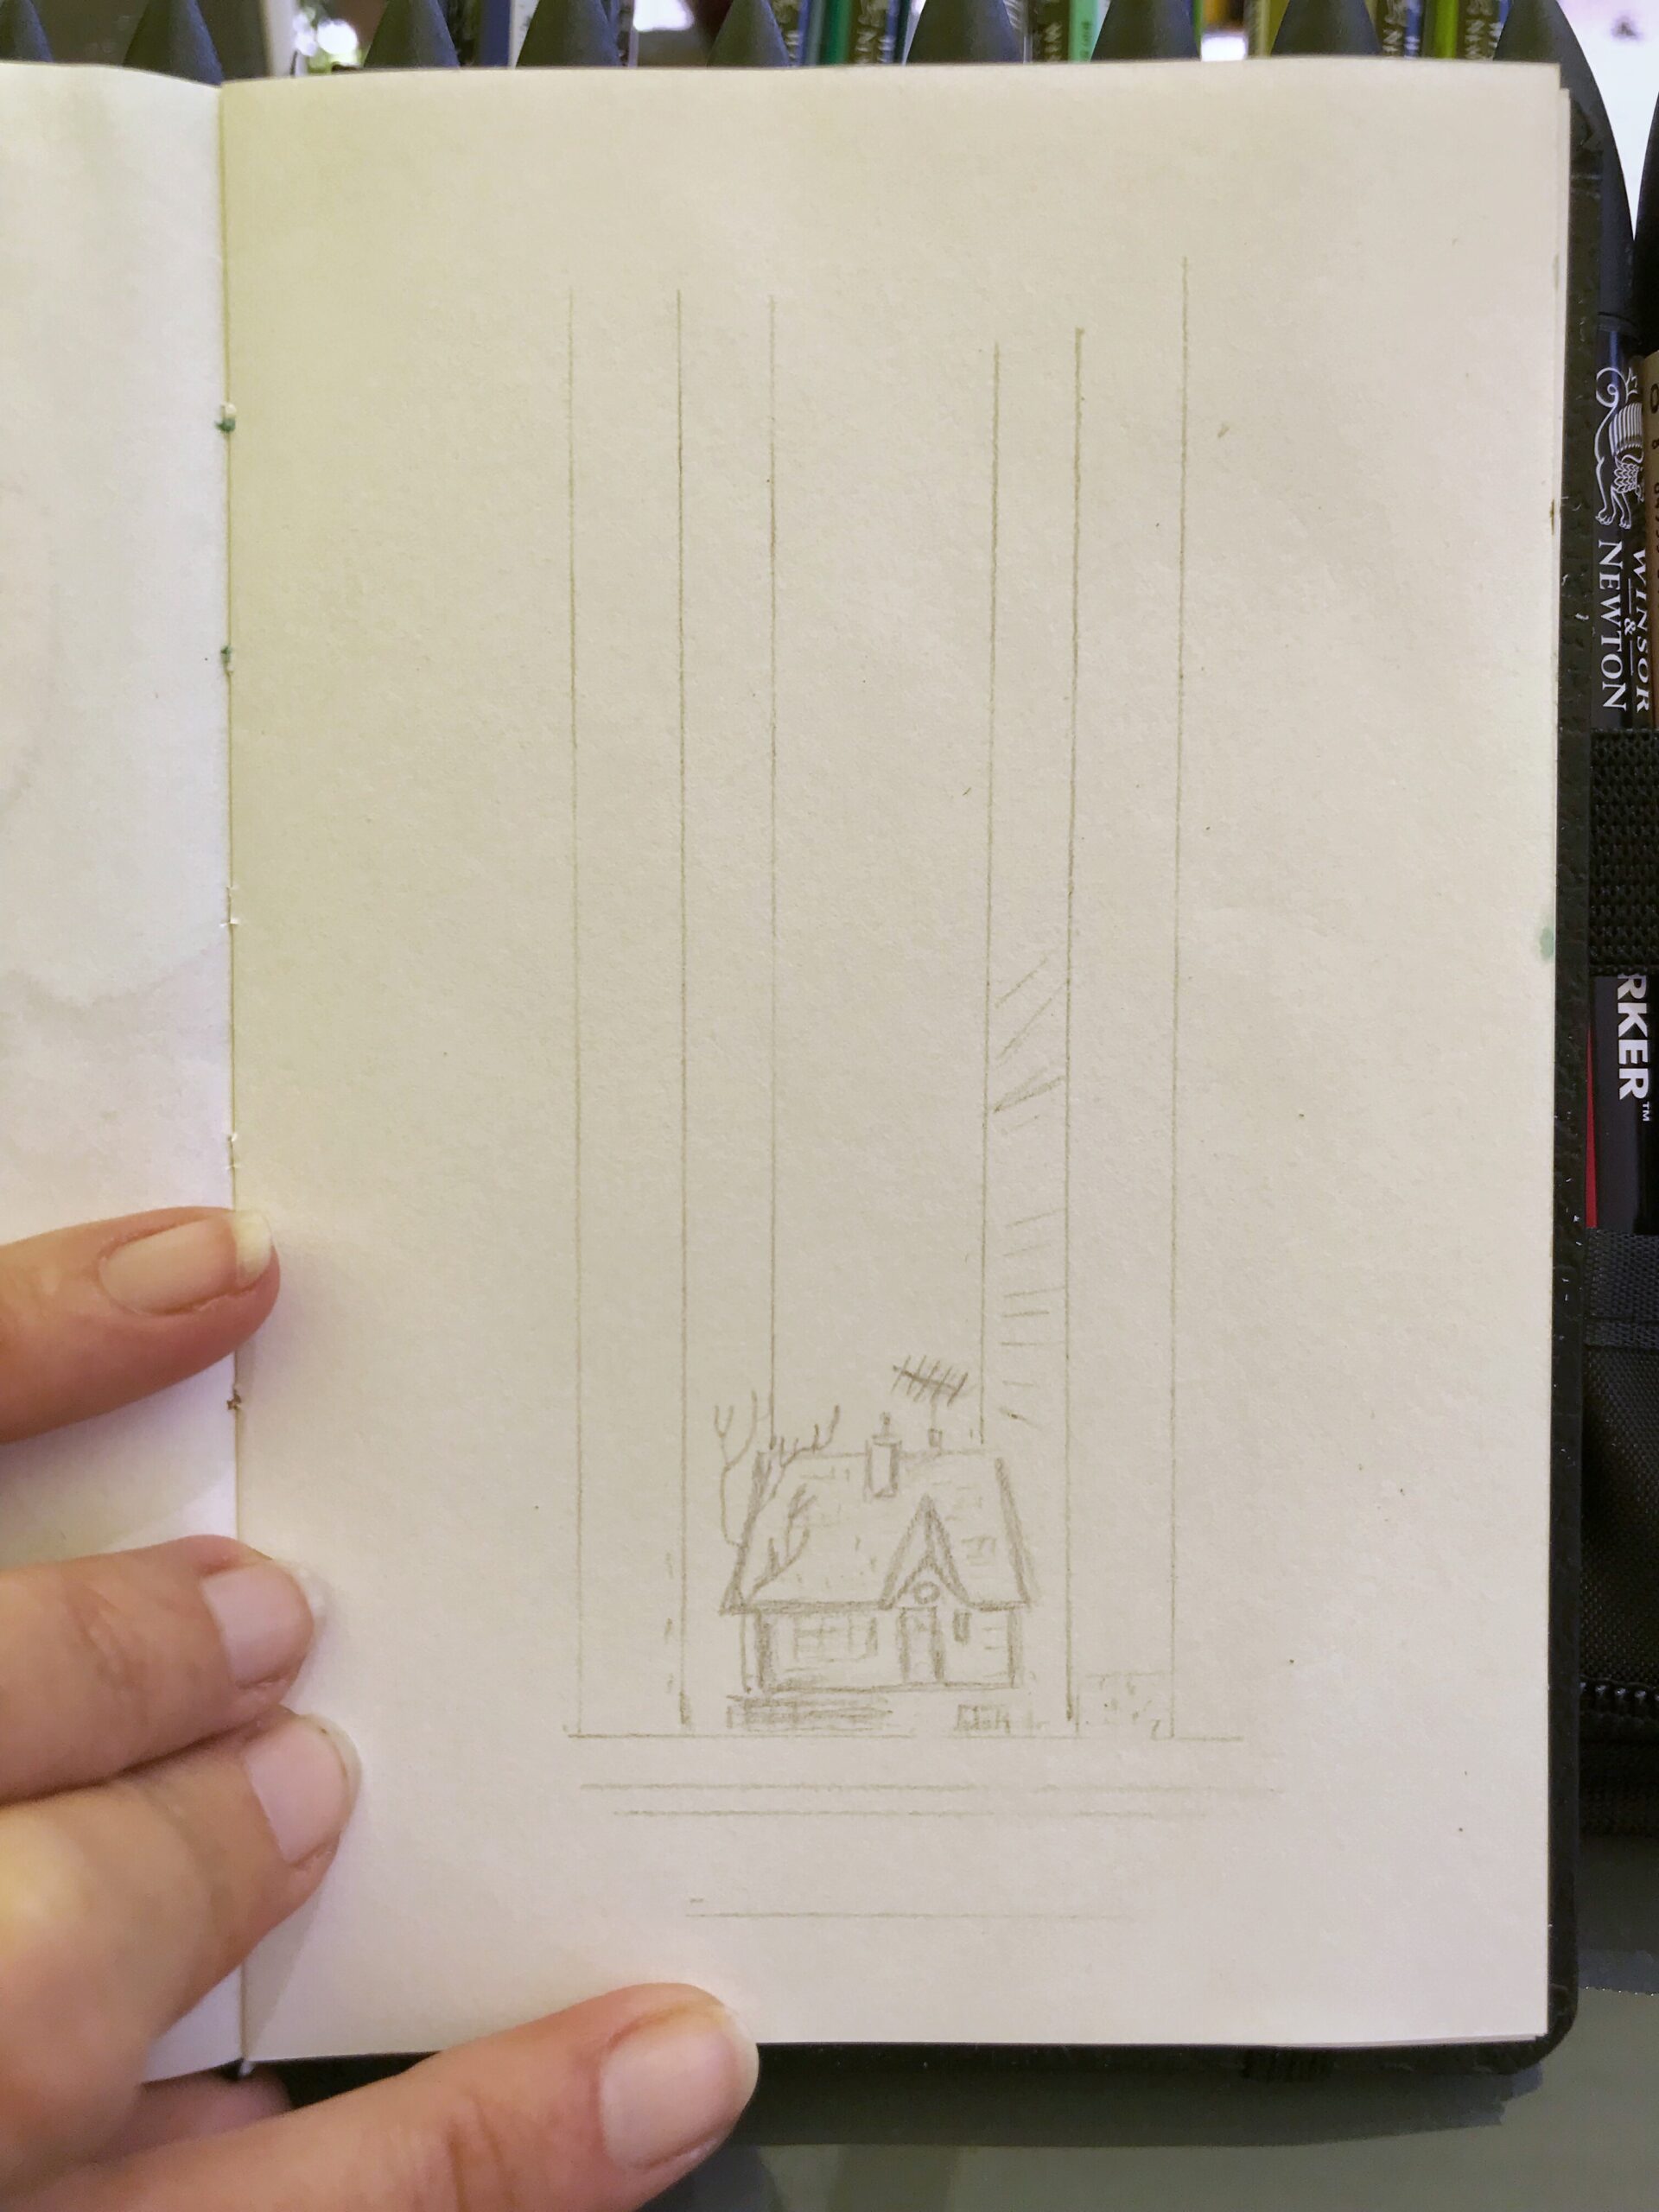 Pencil sketch in an open artbook on a table. My fingers holding the page open are visible.